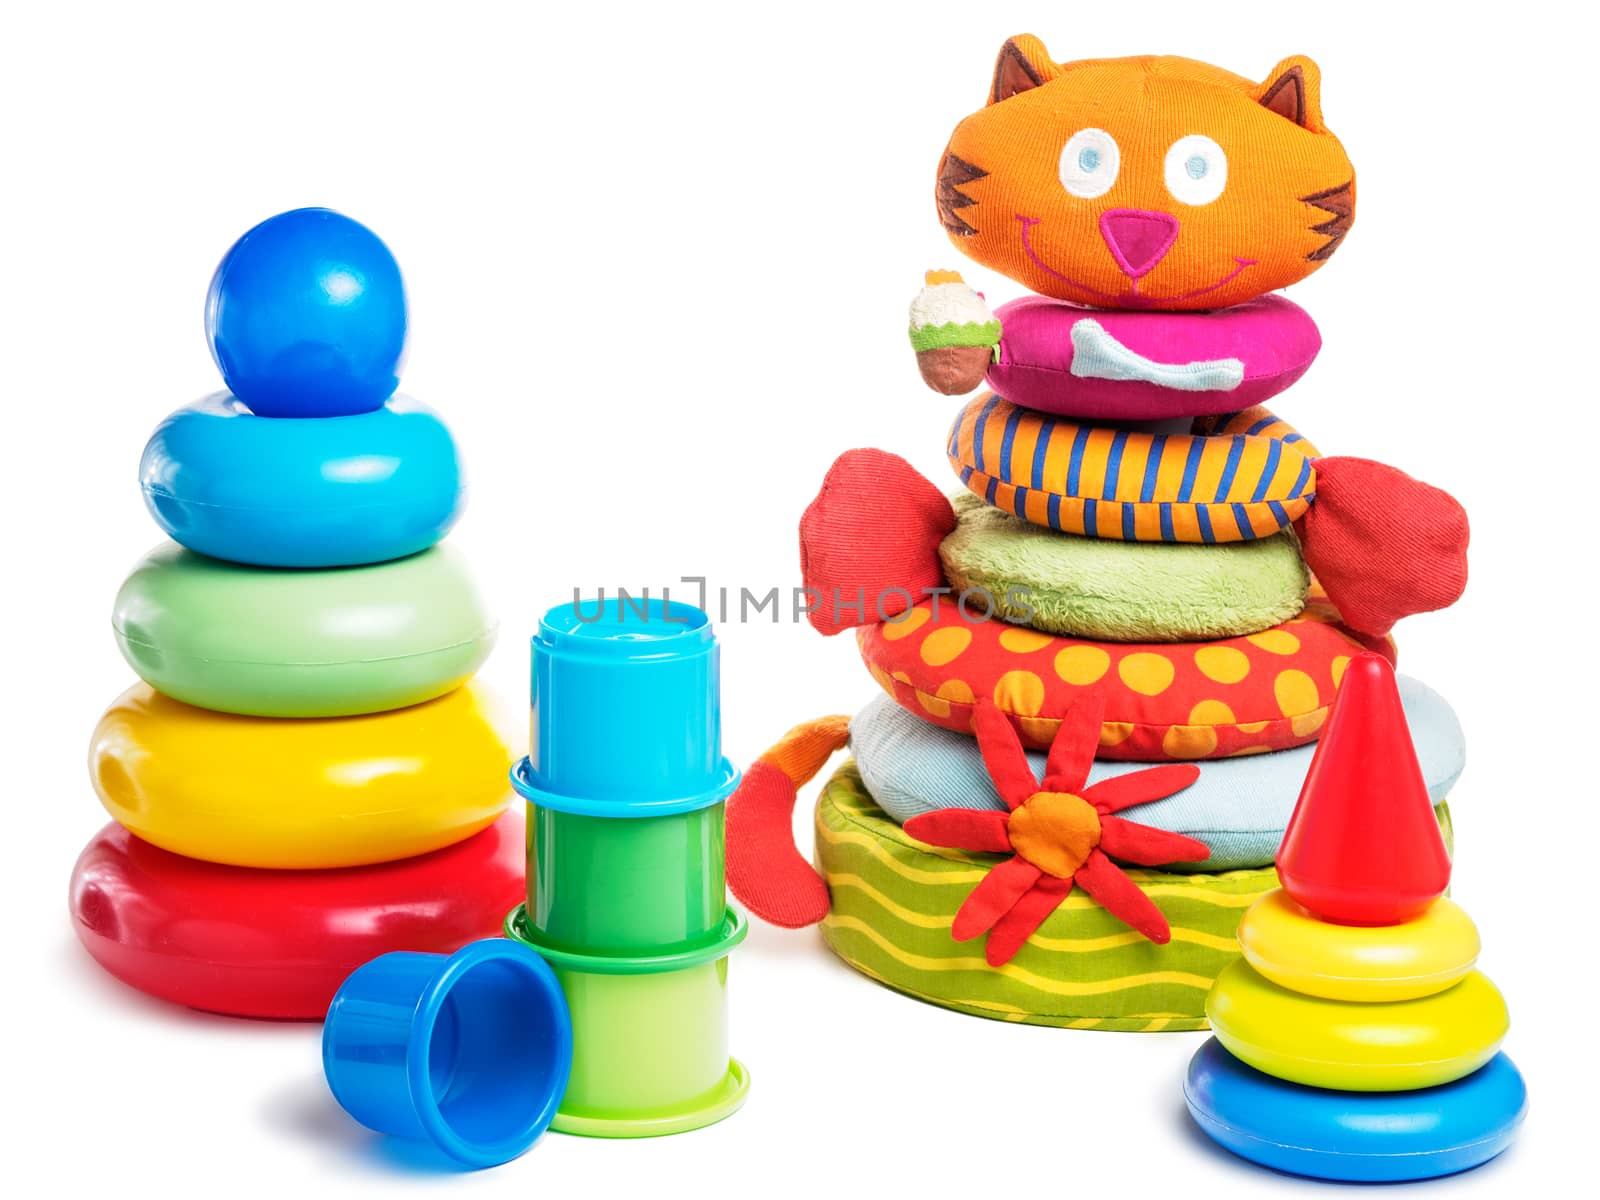 Set of different baby pyramid toys - plastic rings pyramid, cloth pyramid, plastic cup pyramid. Isolated on white with clipping path.